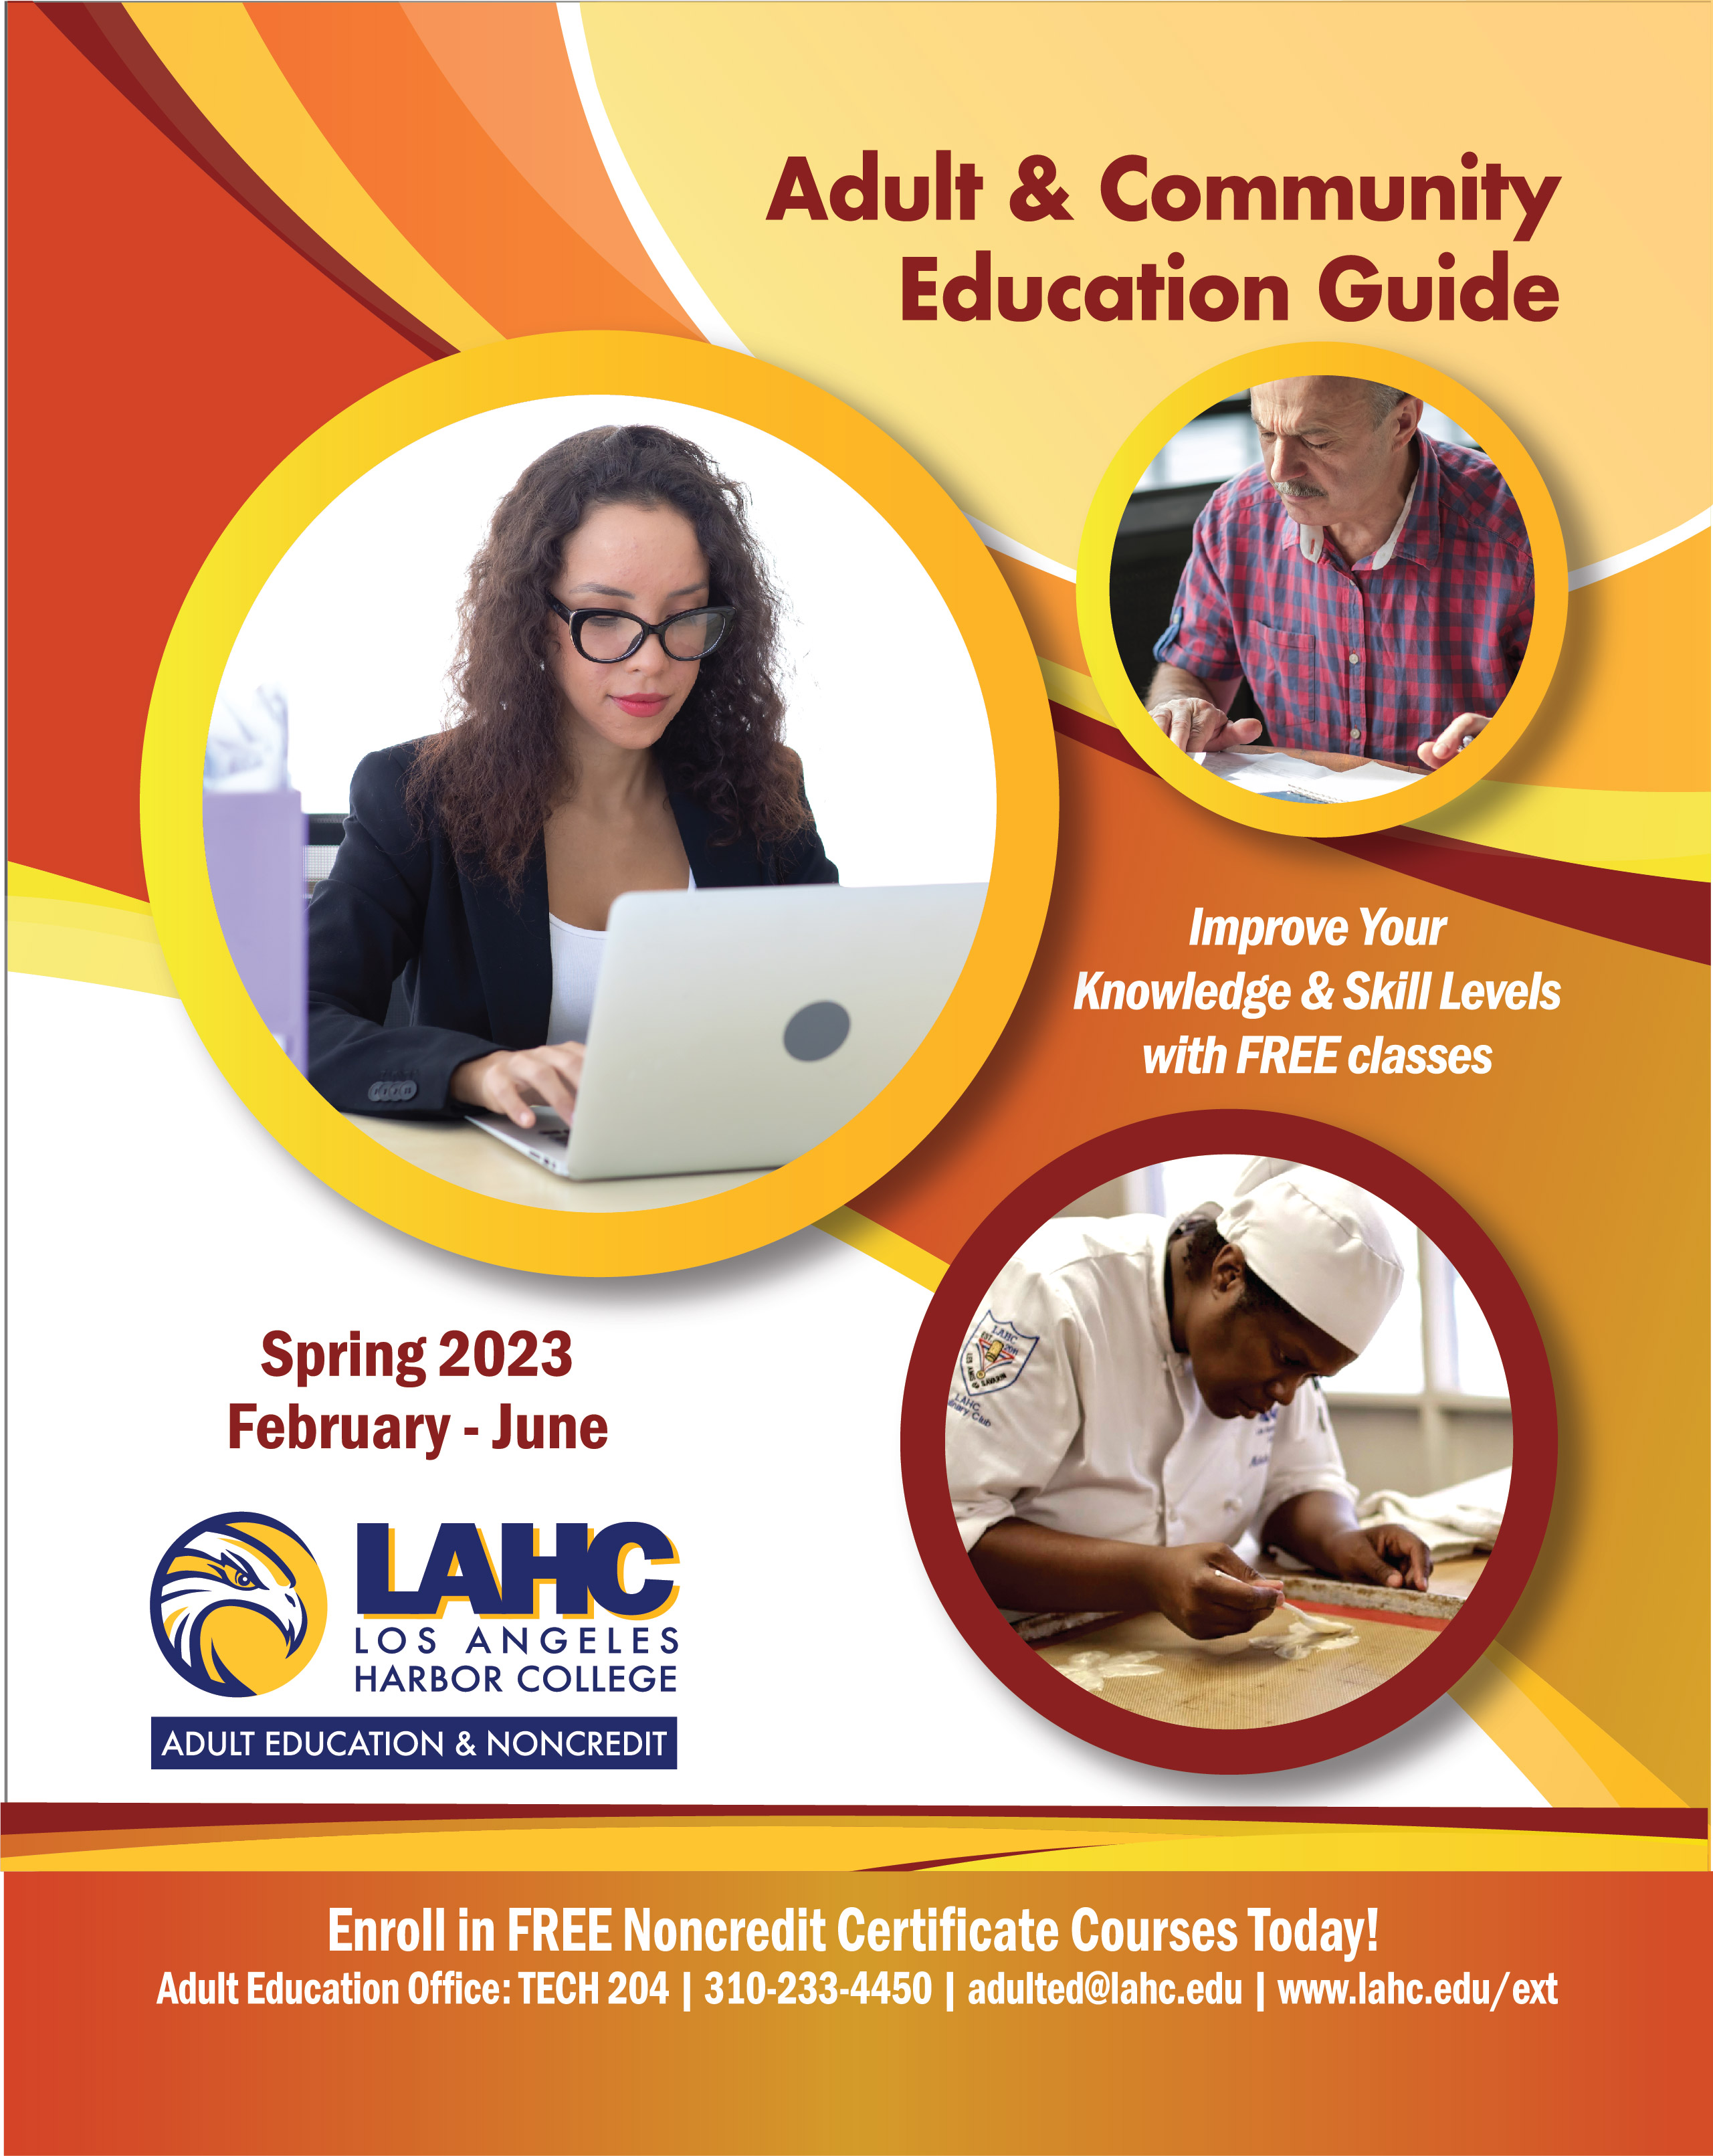 Adult & Community Education Guide